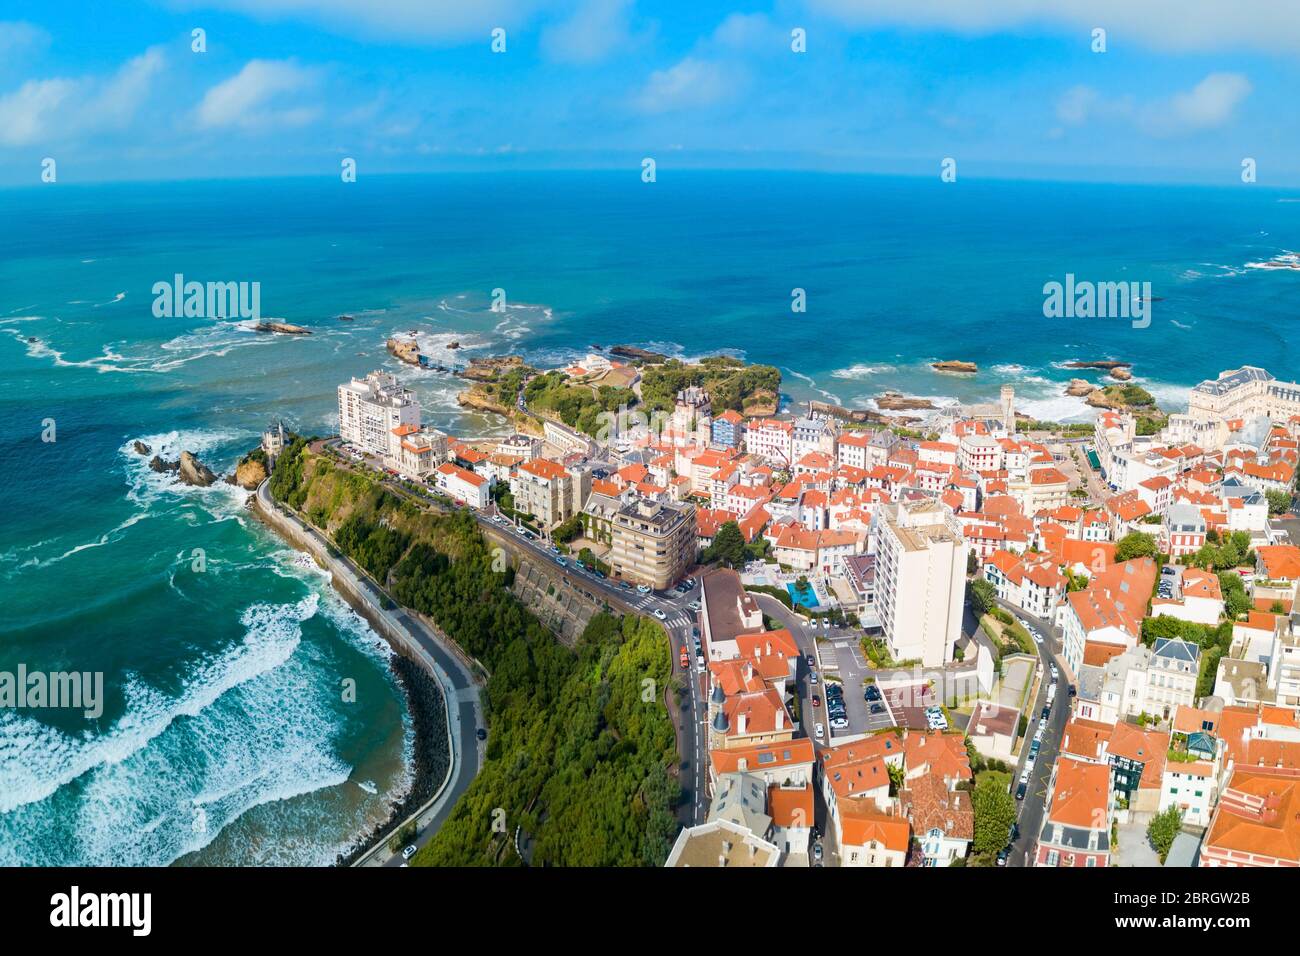 Biarritz aerial panoramic view. Biarritz is a city on the Bay of Biscay on the Atlantic coast in France. Stock Photo